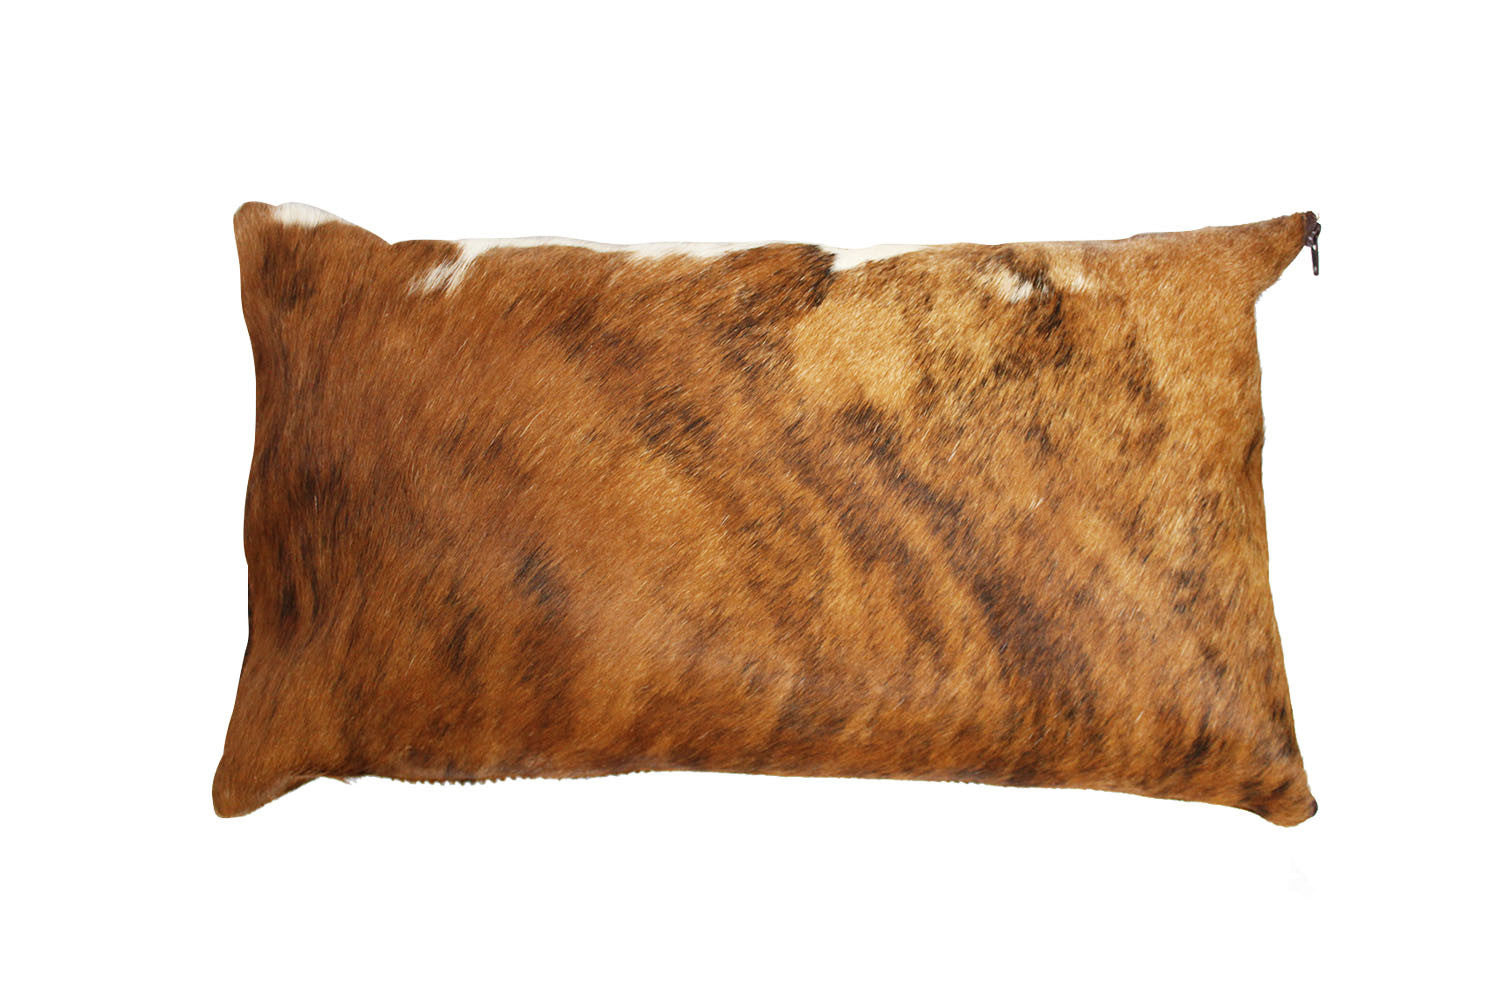 Tri-colored Cowhide Pillow Case - Rodeo Cowhide Rugs